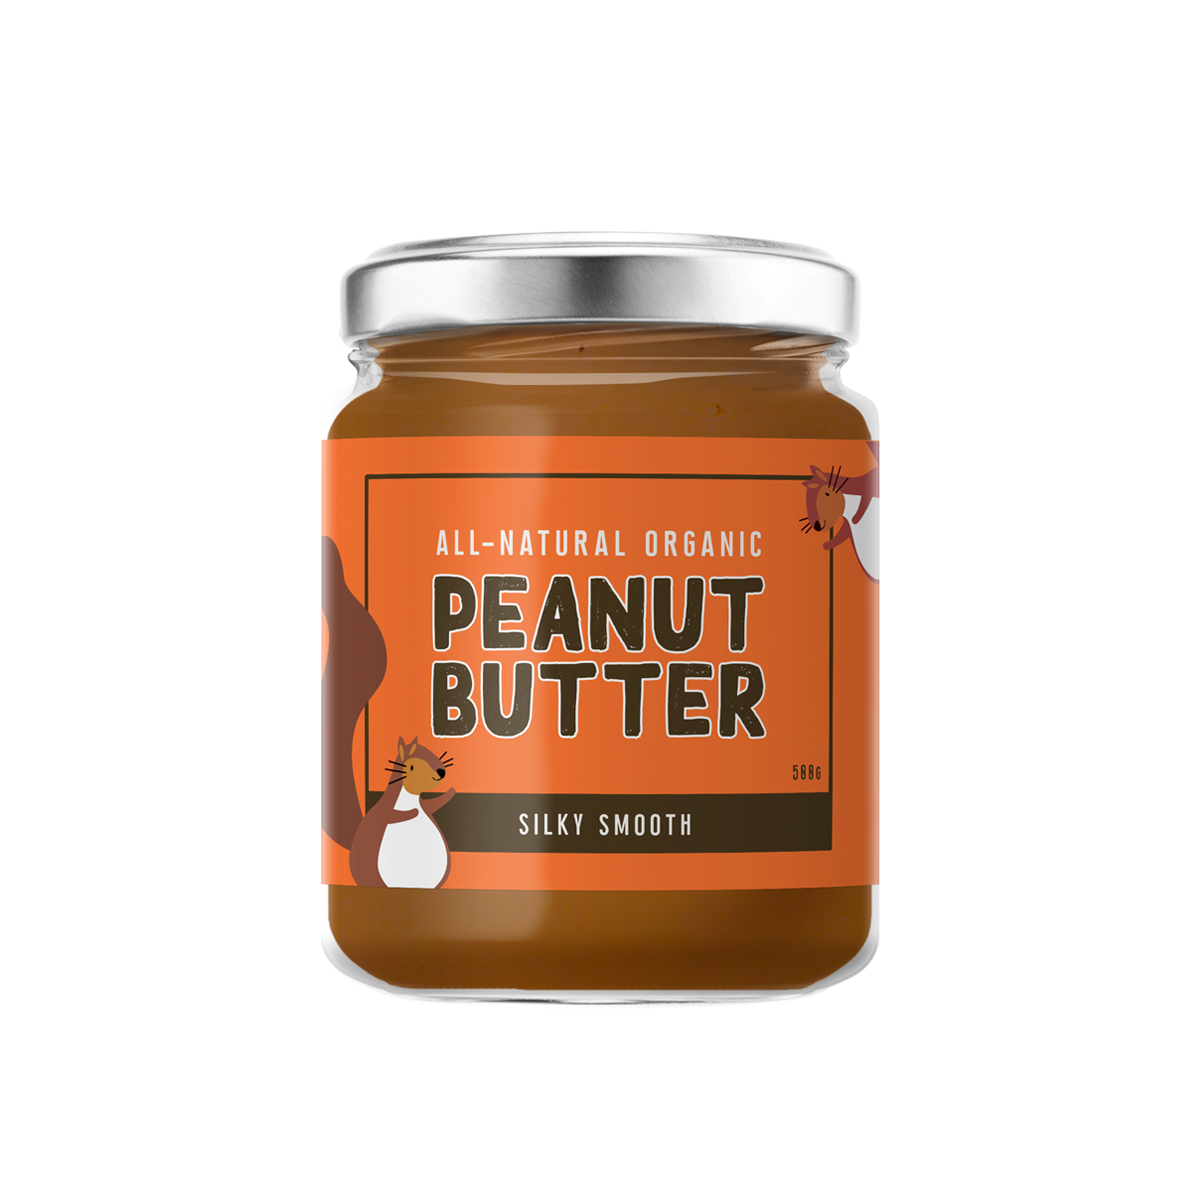 Peanut Butter - Smooth